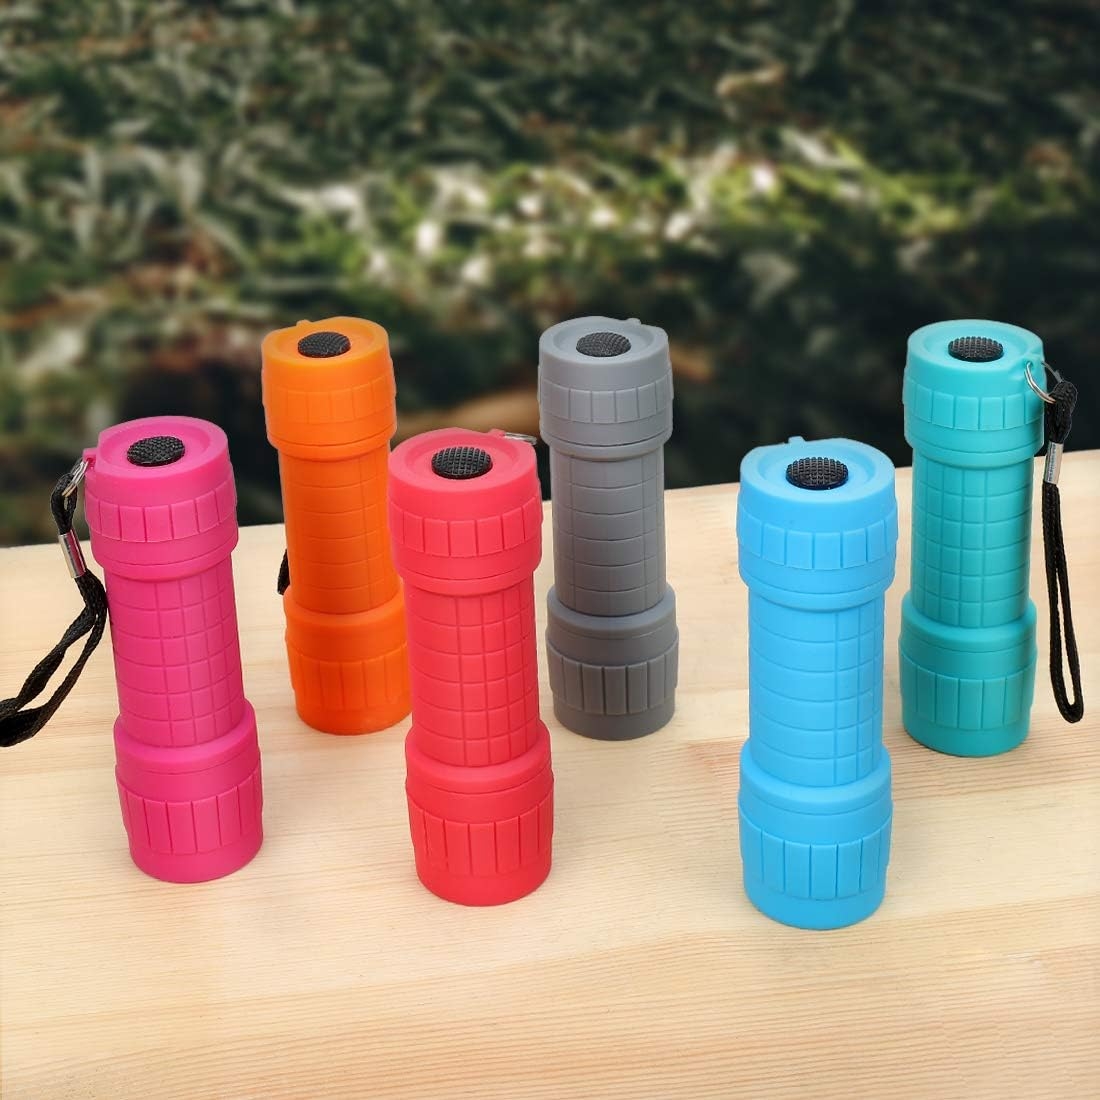 EverBrite 9-LED Flashlight 6-pack Impact Handheld Torch Assorted Colors with Lanyard 3AAA Battery Included (Hurricane Supplies, Camping, Hiking, Emergency, Hunting)